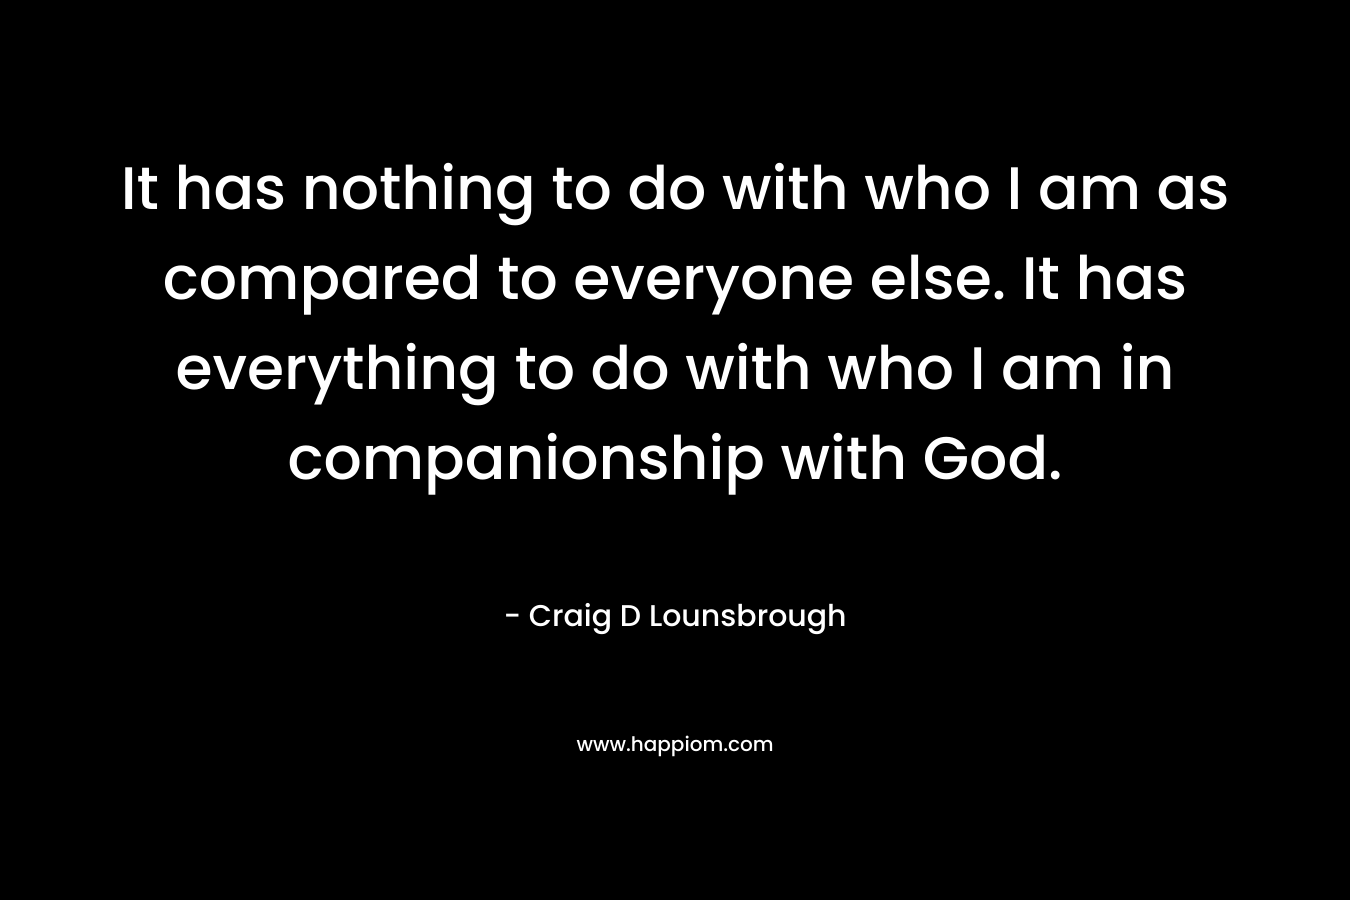 It has nothing to do with who I am as compared to everyone else. It has everything to do with who I am in companionship with God. – Craig D Lounsbrough